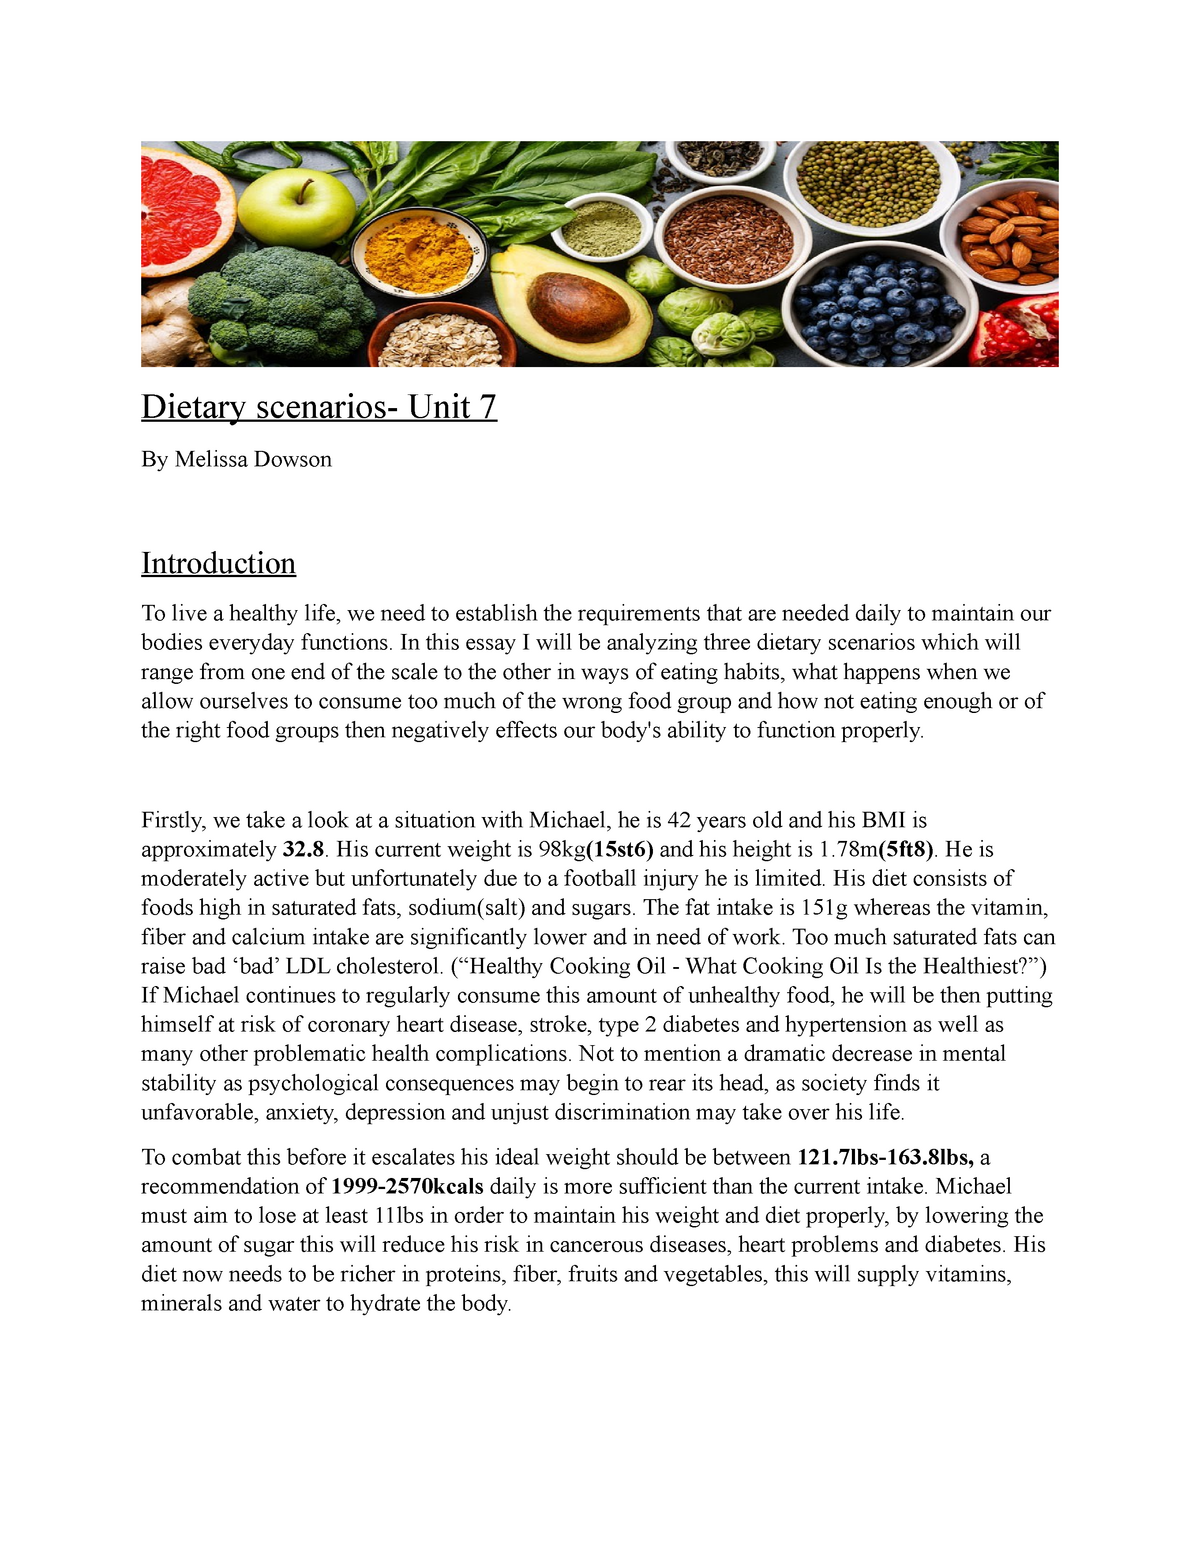 dietary analysis assignment example